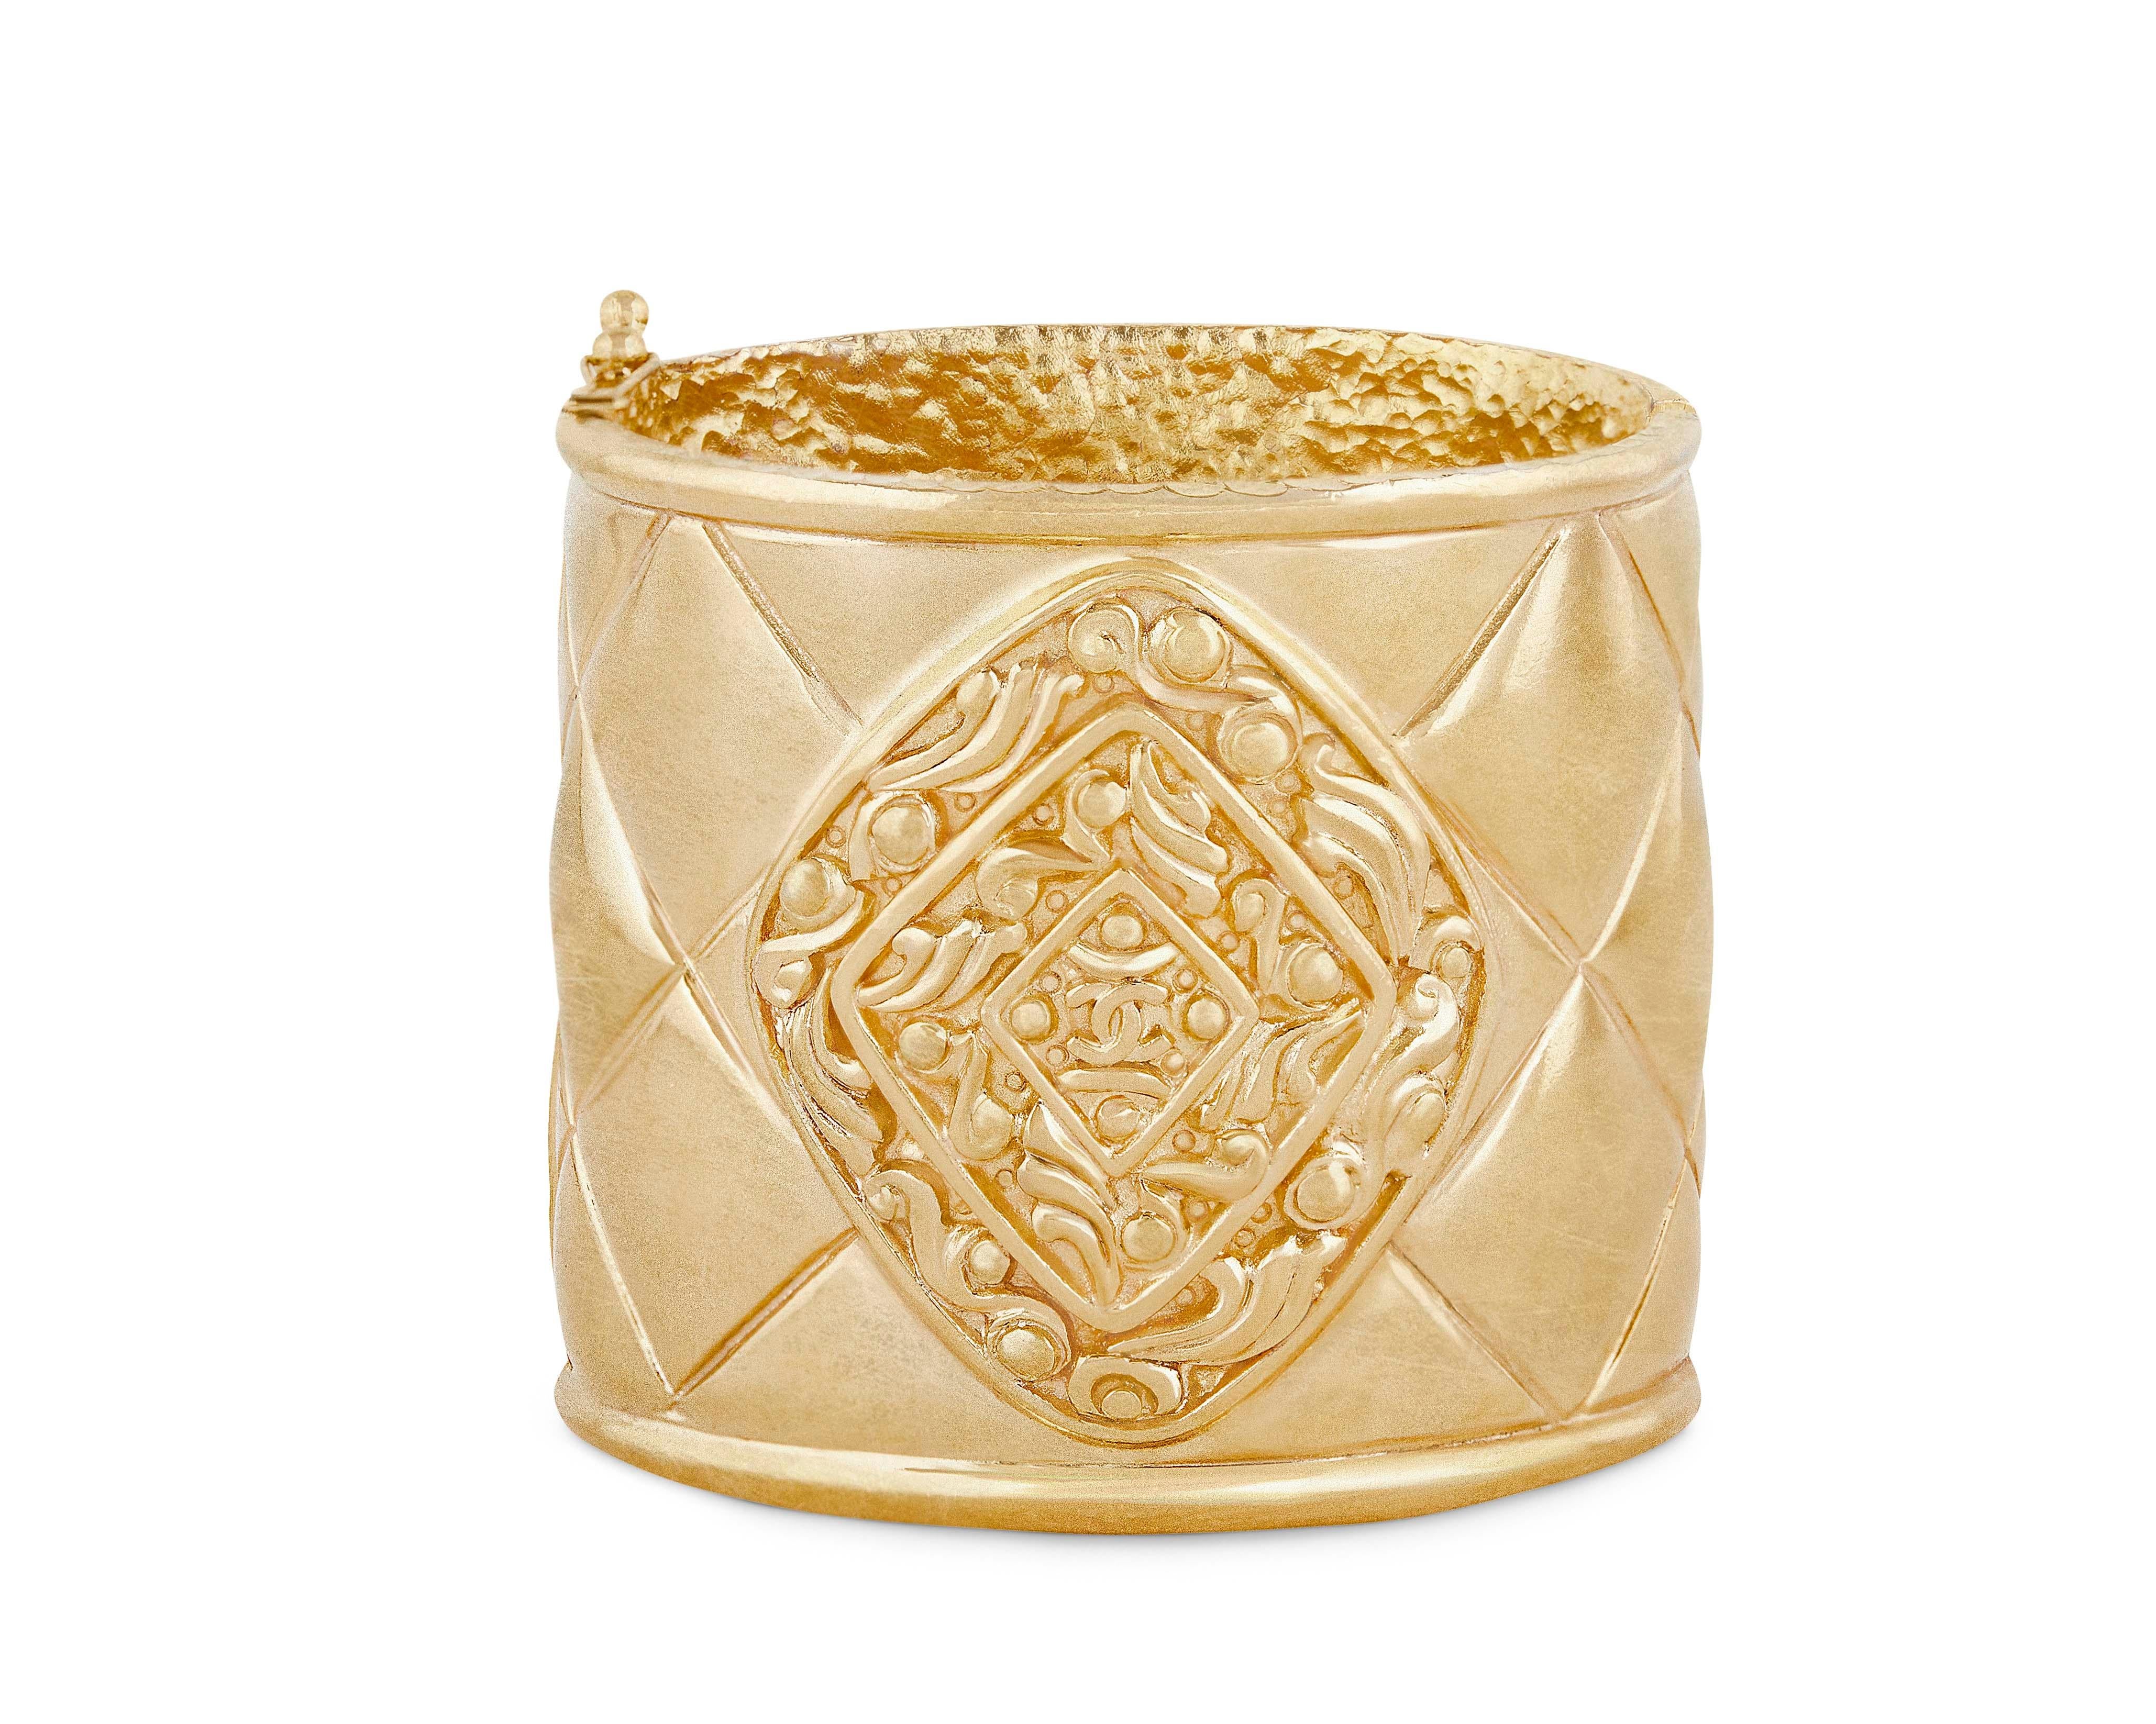 Vintage Chanel Matelasse hinged cuff bracelet in gold plate from the 1980s.  This collector's item features the signature Chanel quilted pattern all around with a central decorative Byzantine medallion with the iconic interlocking CC logo.  Bracelet